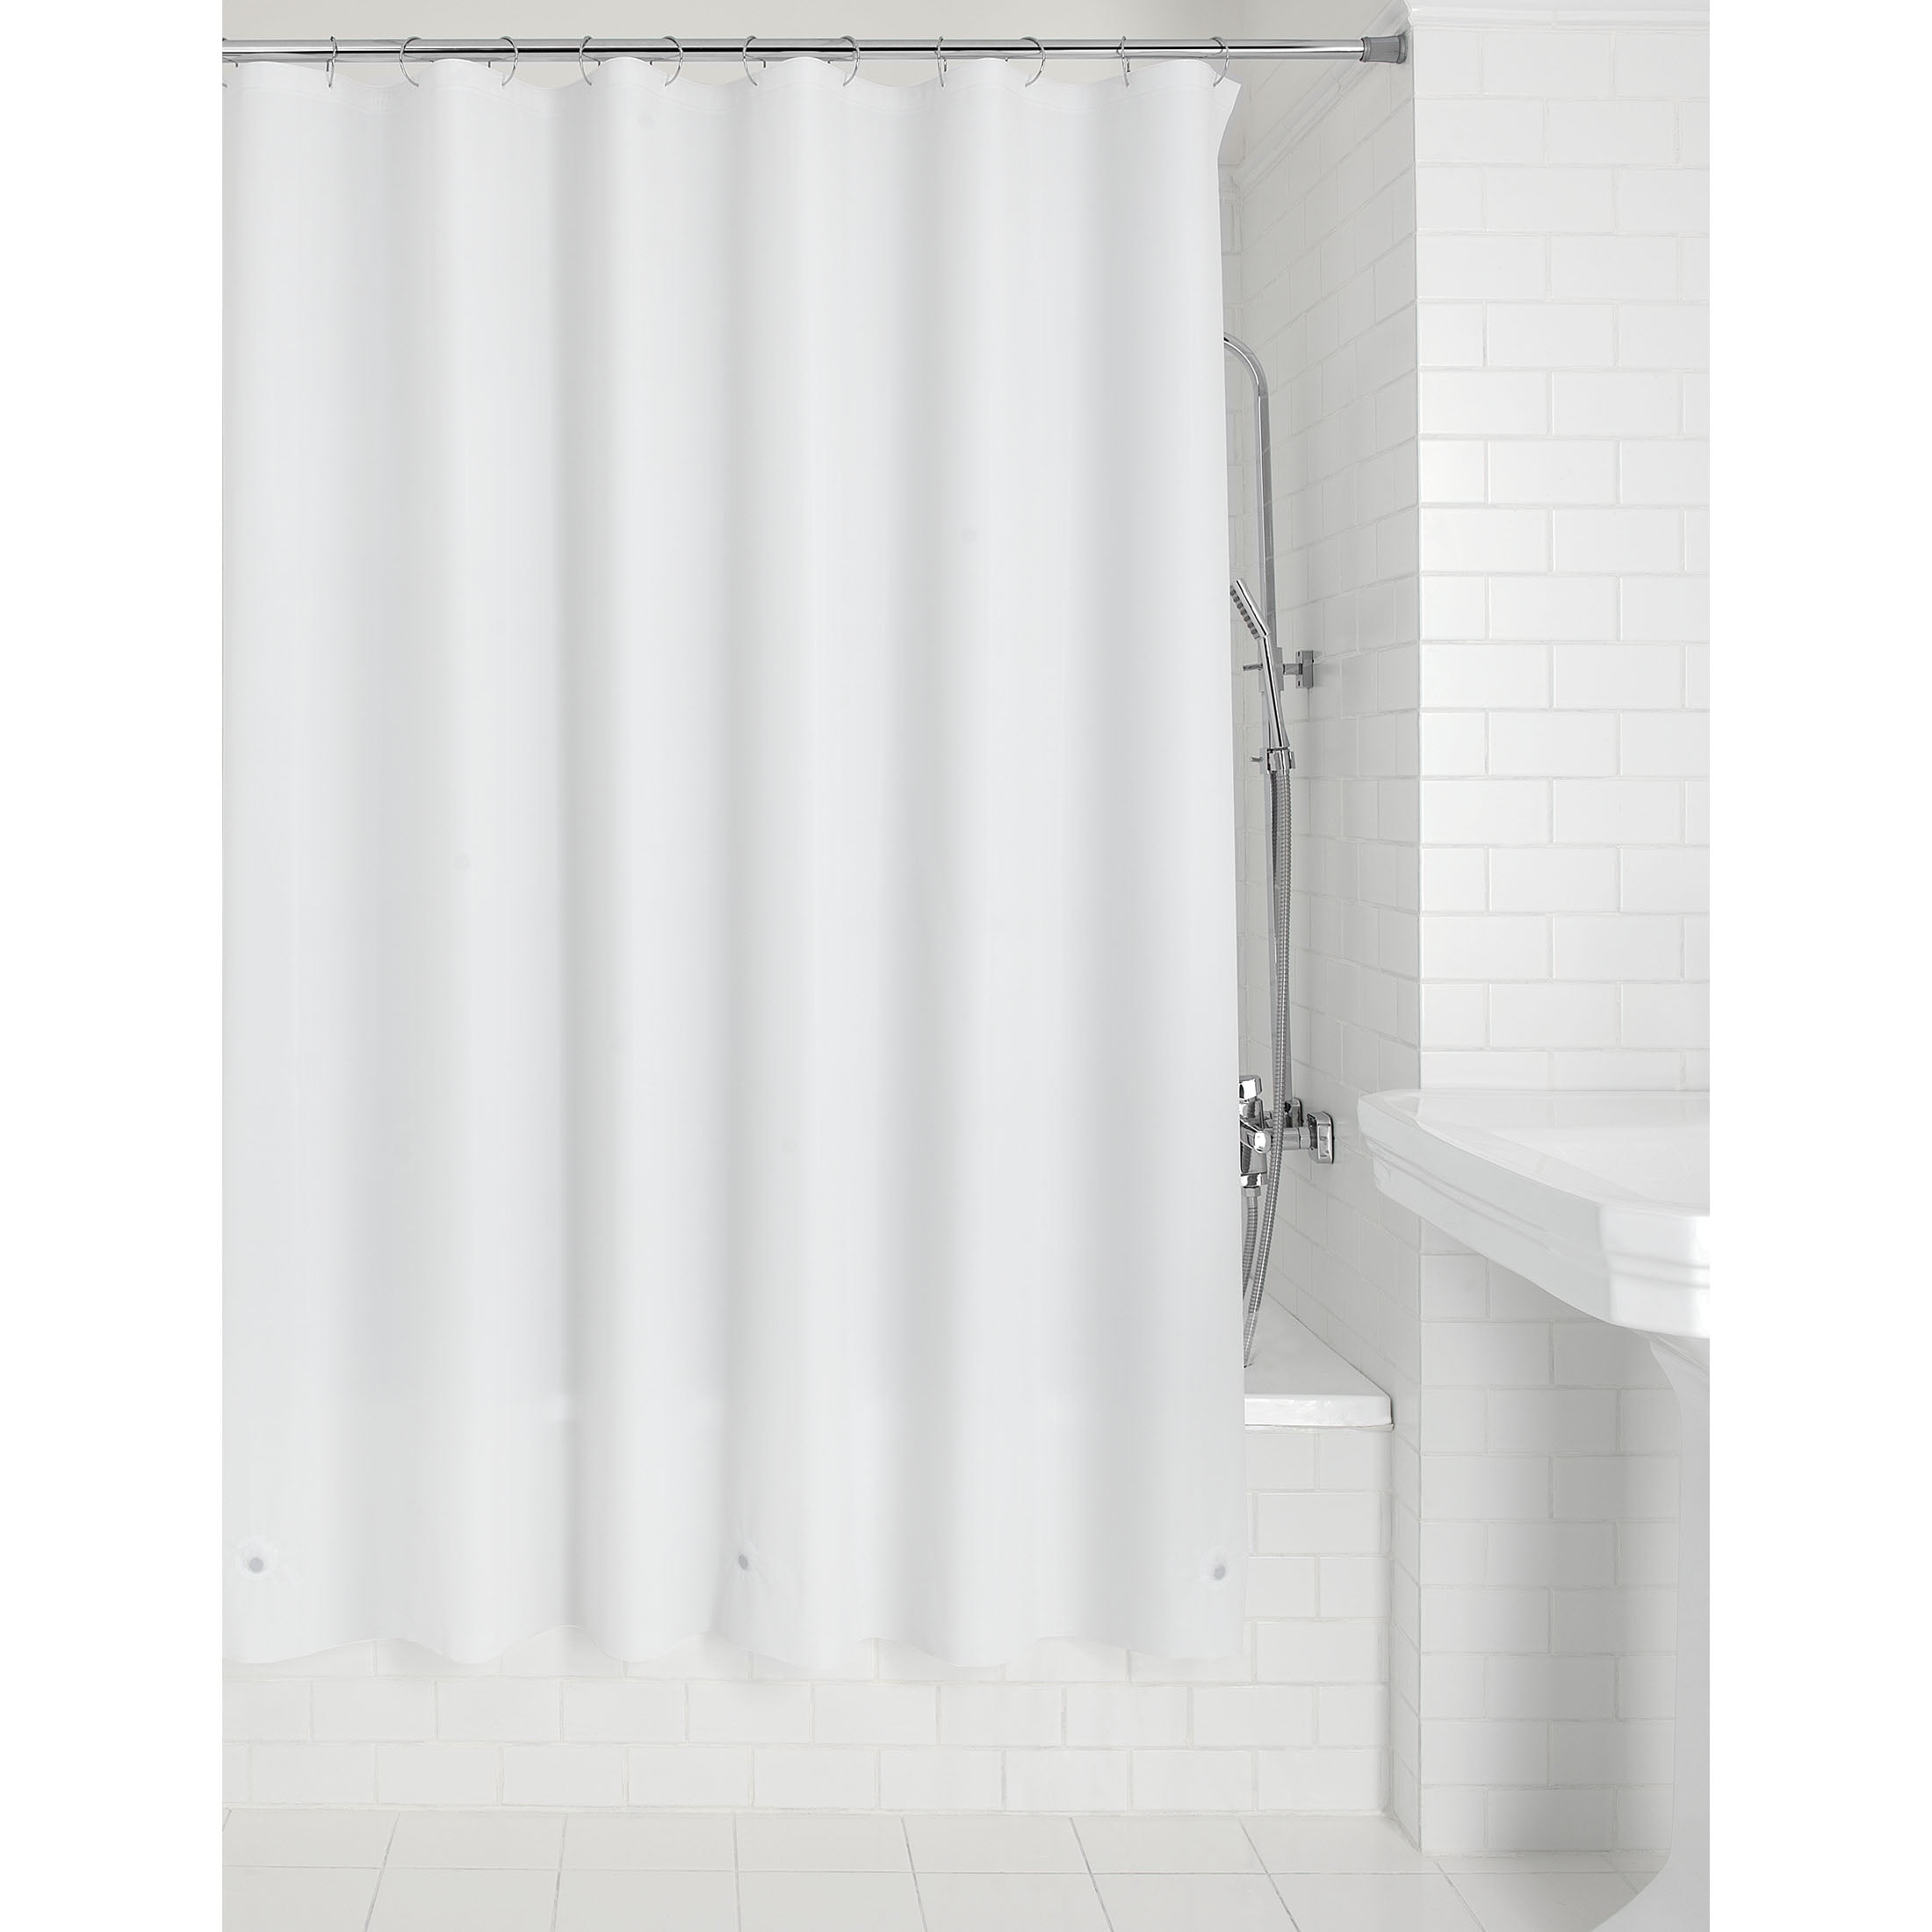 Peva Solid Shower Curtain Liner White, Most Environmentally Friendly Shower Curtain Liner